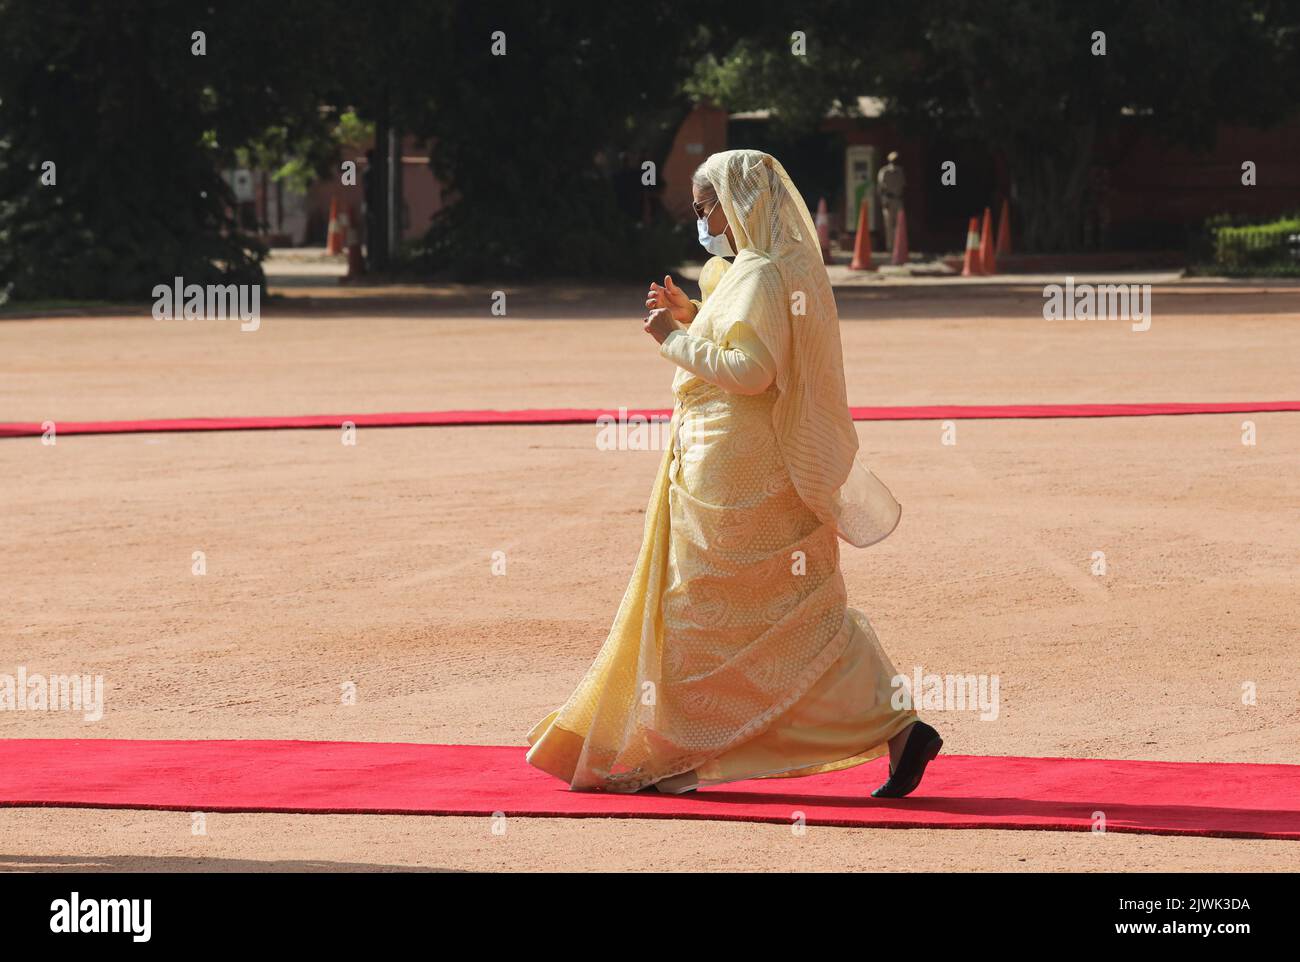 New Delhi, India. 06th Sep, 2022. Bangladesh Prime Minister Sheikh Hasina seen during the ceremonial reception at the Rashtrapati Bhavan in New Delhi. She was on a four-day visit to India. Indian Prime Minister Modi and Bangladesh Prime Minister Sheikh Hasina discuss issues related, Defence, Trade, and connectivity. India and Bangladesh are likely to sign pacts on water sharing on Kushiyara River, training and IT cooperation in Railways, Science, and Space. Credit: SOPA Images Limited/Alamy Live News Stock Photo